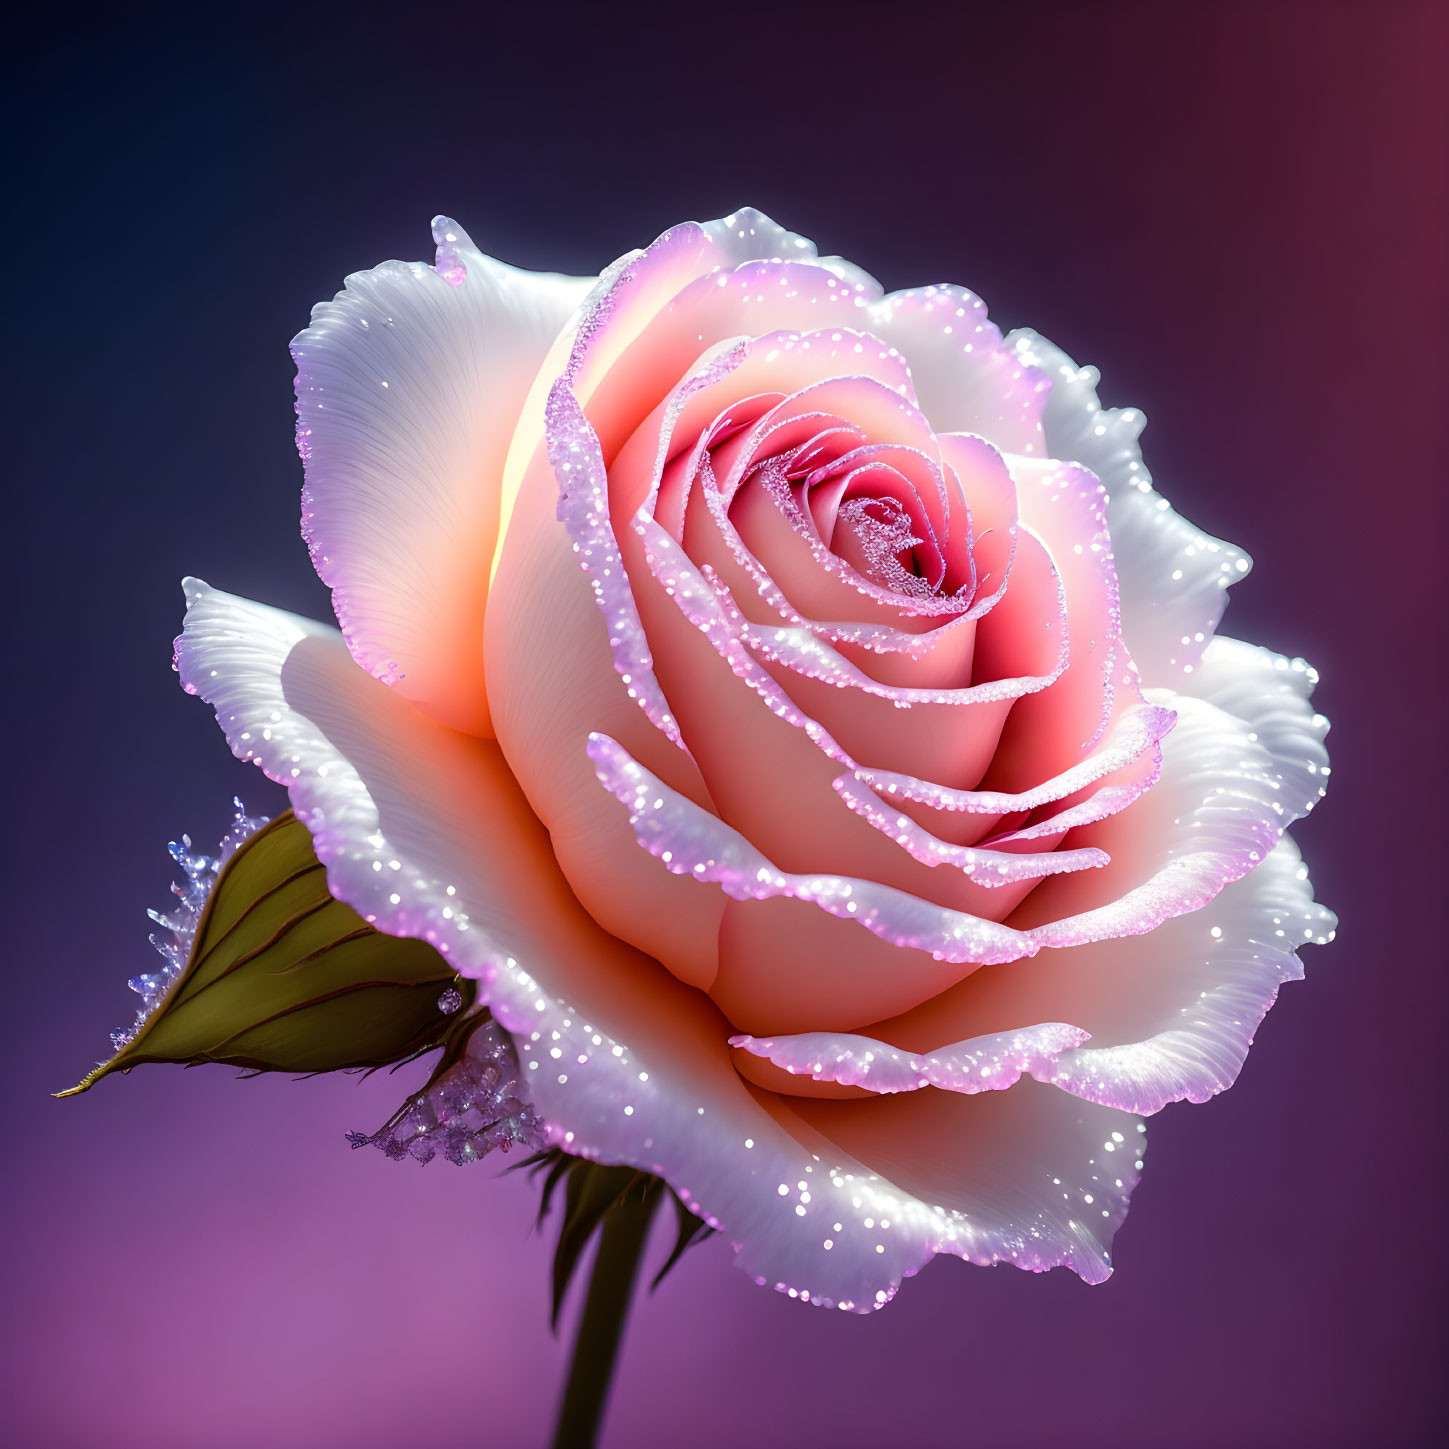 Dew-covered pink rose on purple gradient background